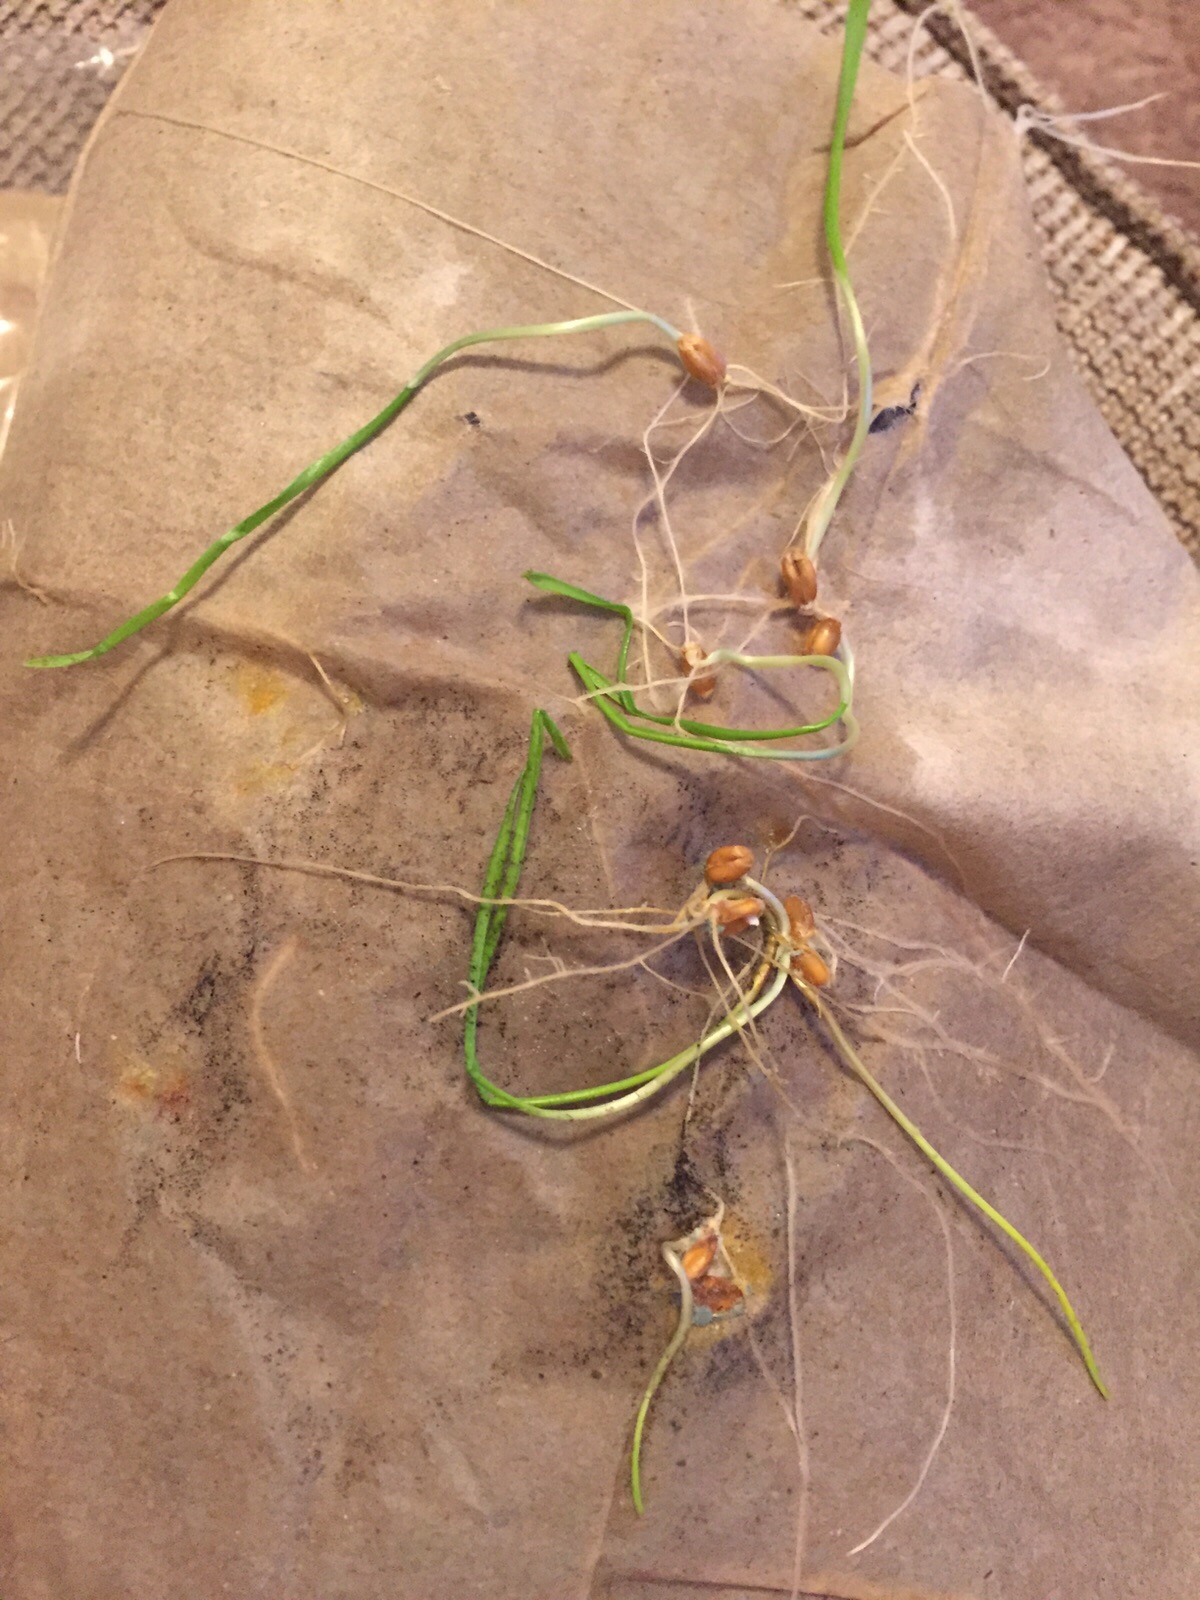 This image shows the seeds that germinated in M M orange juice after 13 days.